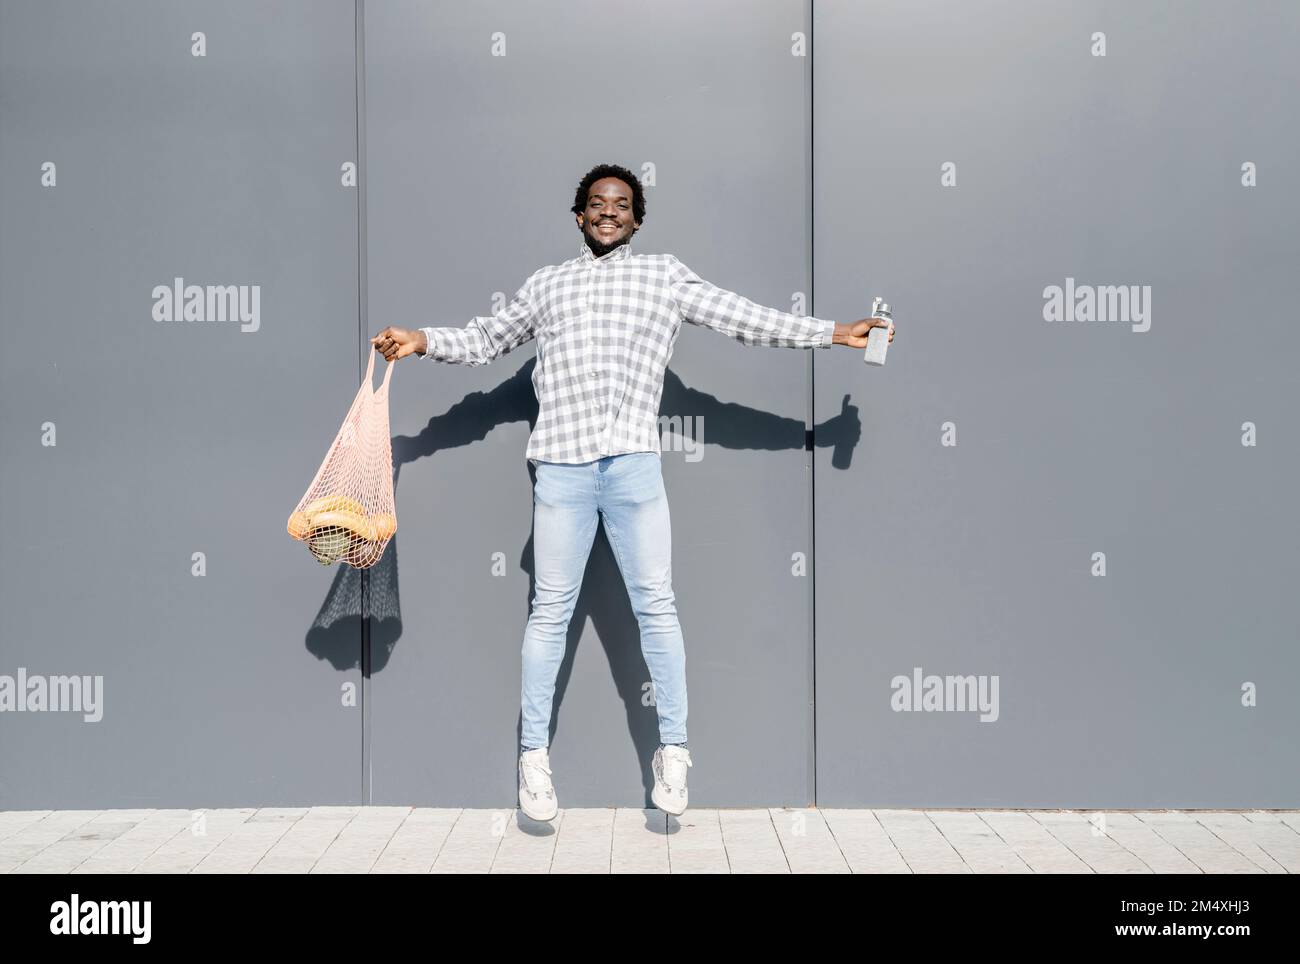 Cheerful jumping in front of gray wall holding mesh bag Stock Photo